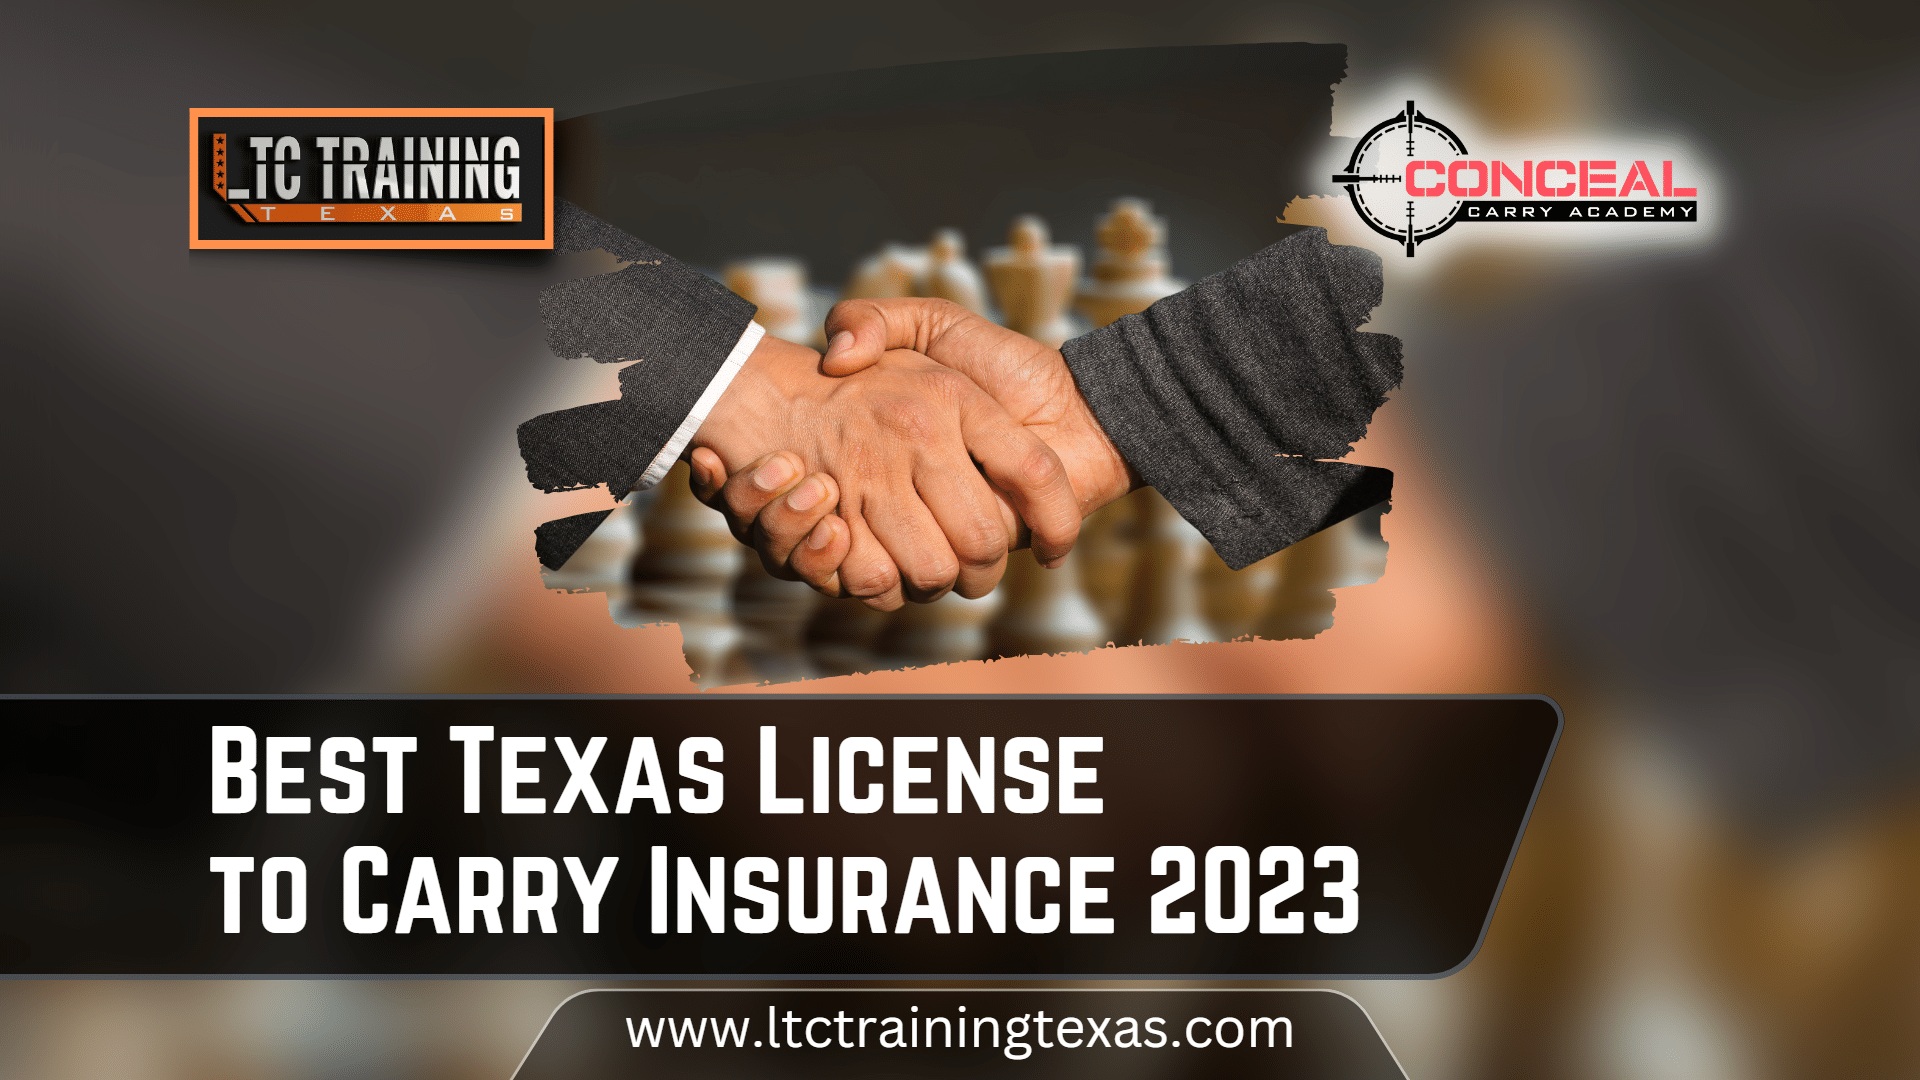 Best Texas License to Carry Insurance 2023